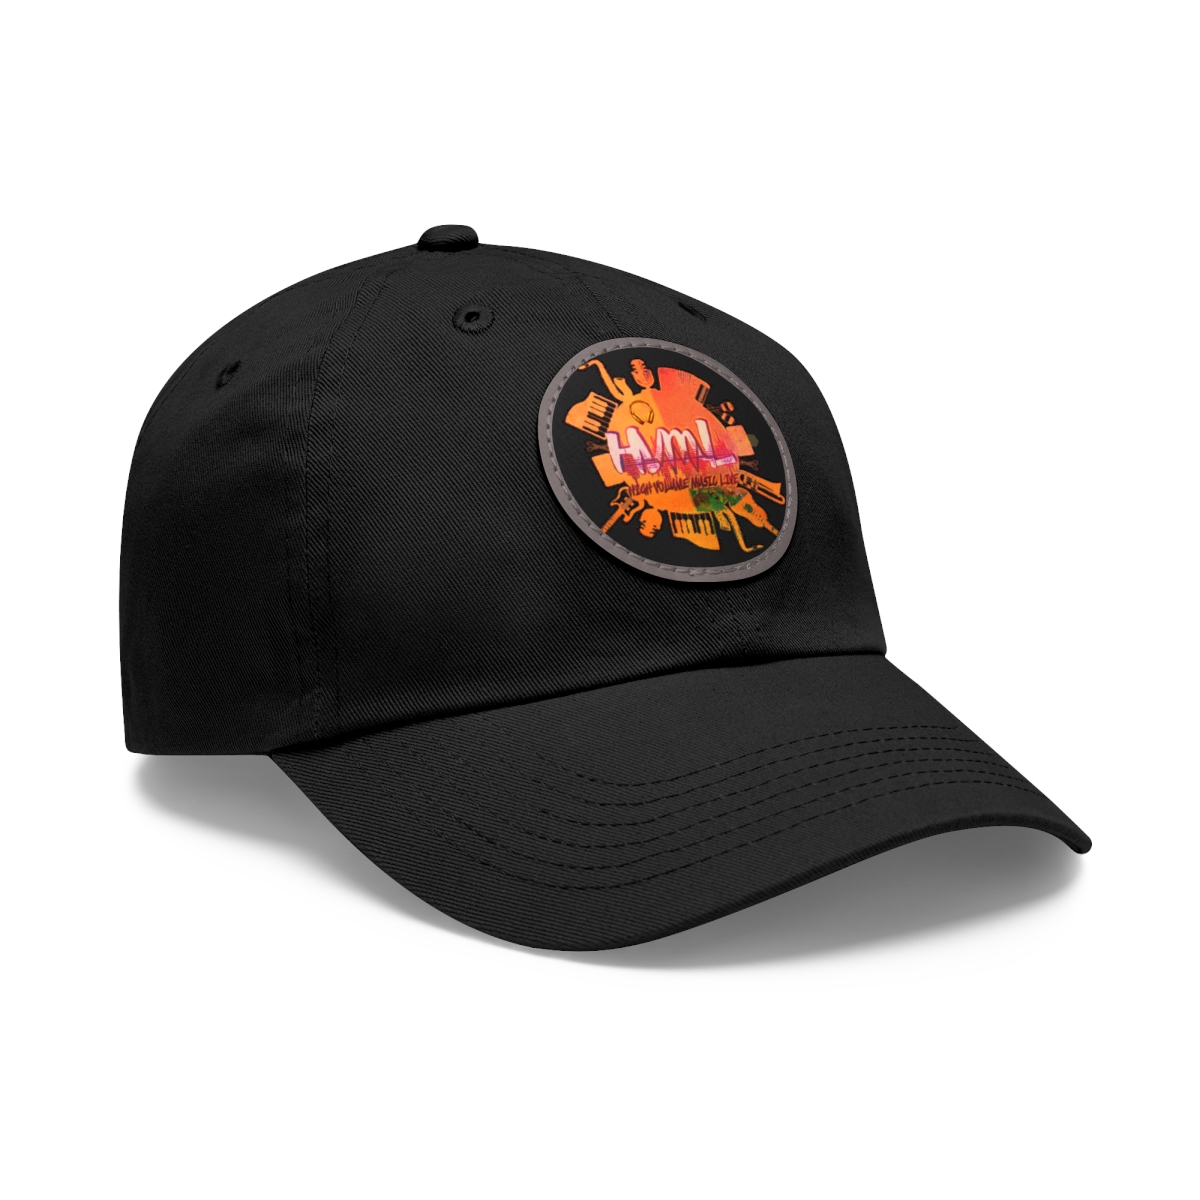 𝙃𝙄𝙂𝙃𝙑𝙊𝙇𝙐𝙈𝙀 𝙈𝙐𝙎𝙄𝘾 𝙇𝙄𝙑𝙀 Dad Hat w/Leather Patch product thumbnail image